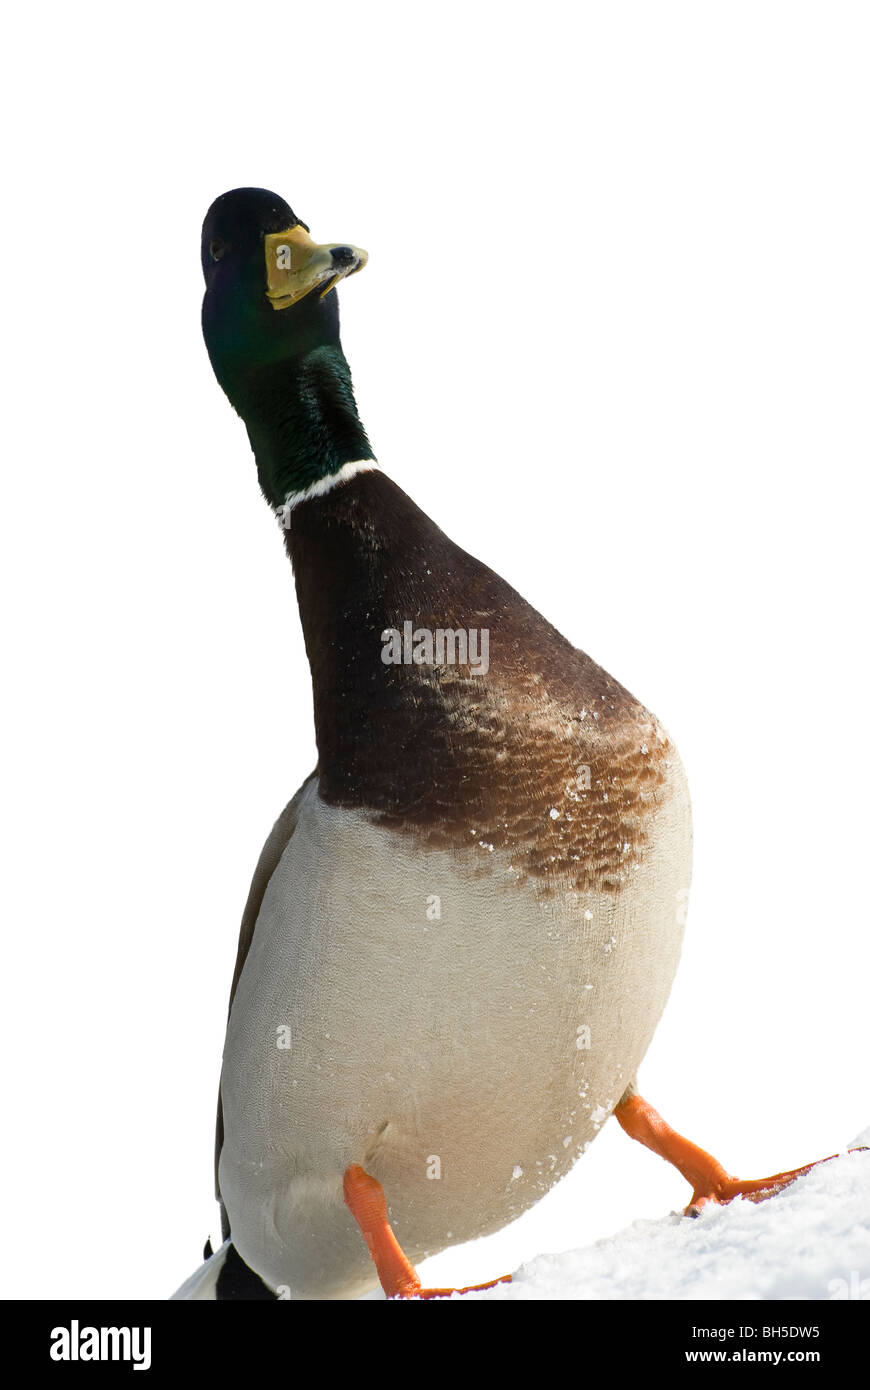 A wild duck staying on white snow Stock Photo